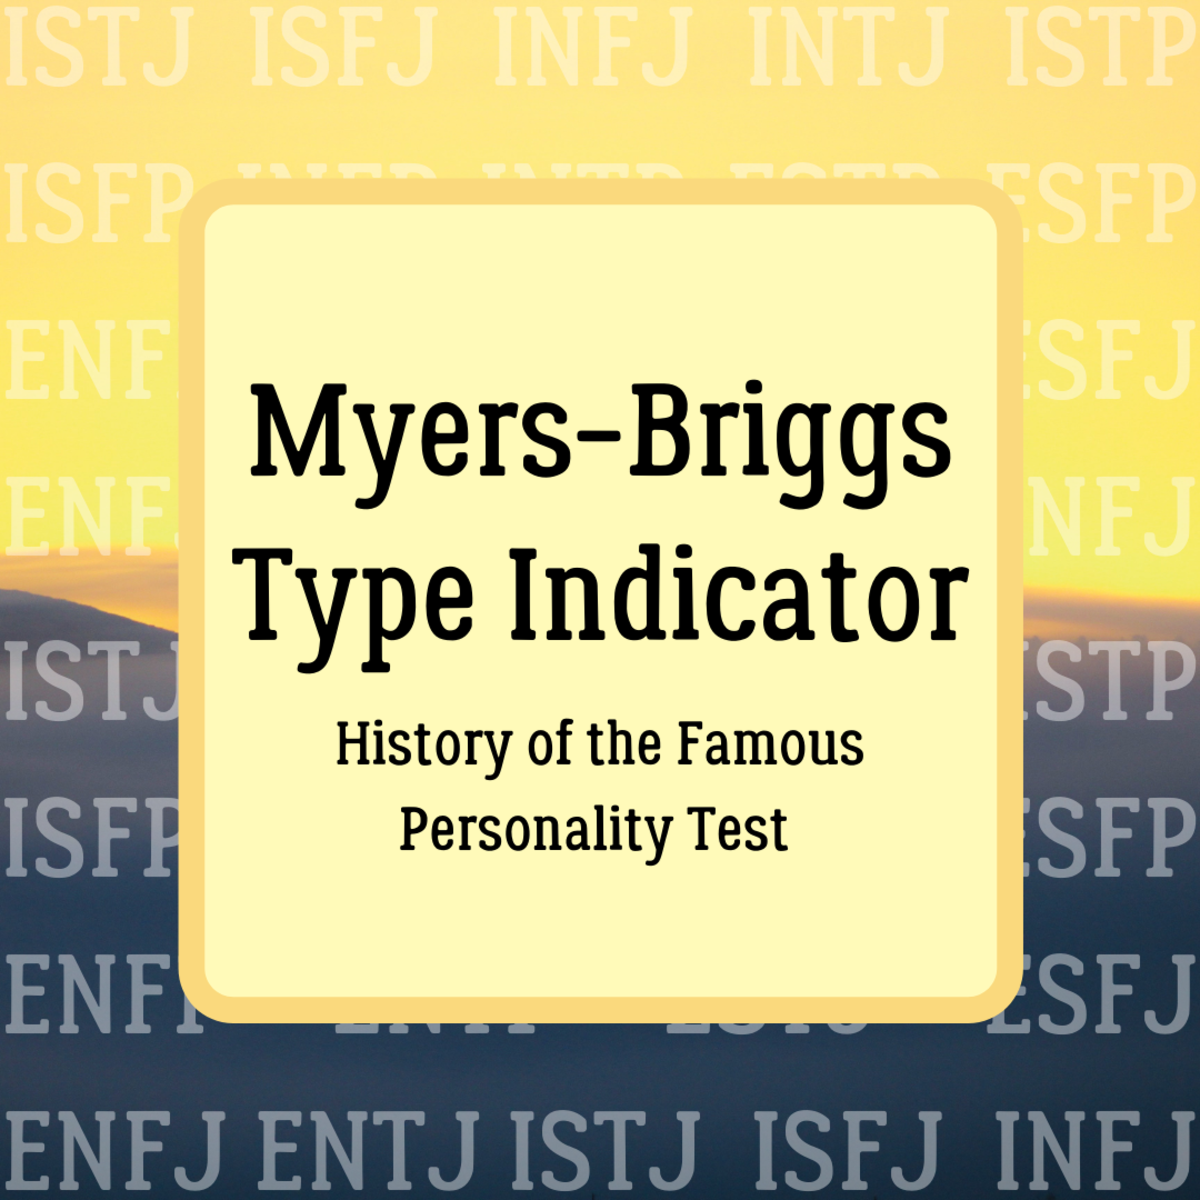 Discover who created the Myers-Briggs Type Indicator personality test and why, and explore how the test is used today.